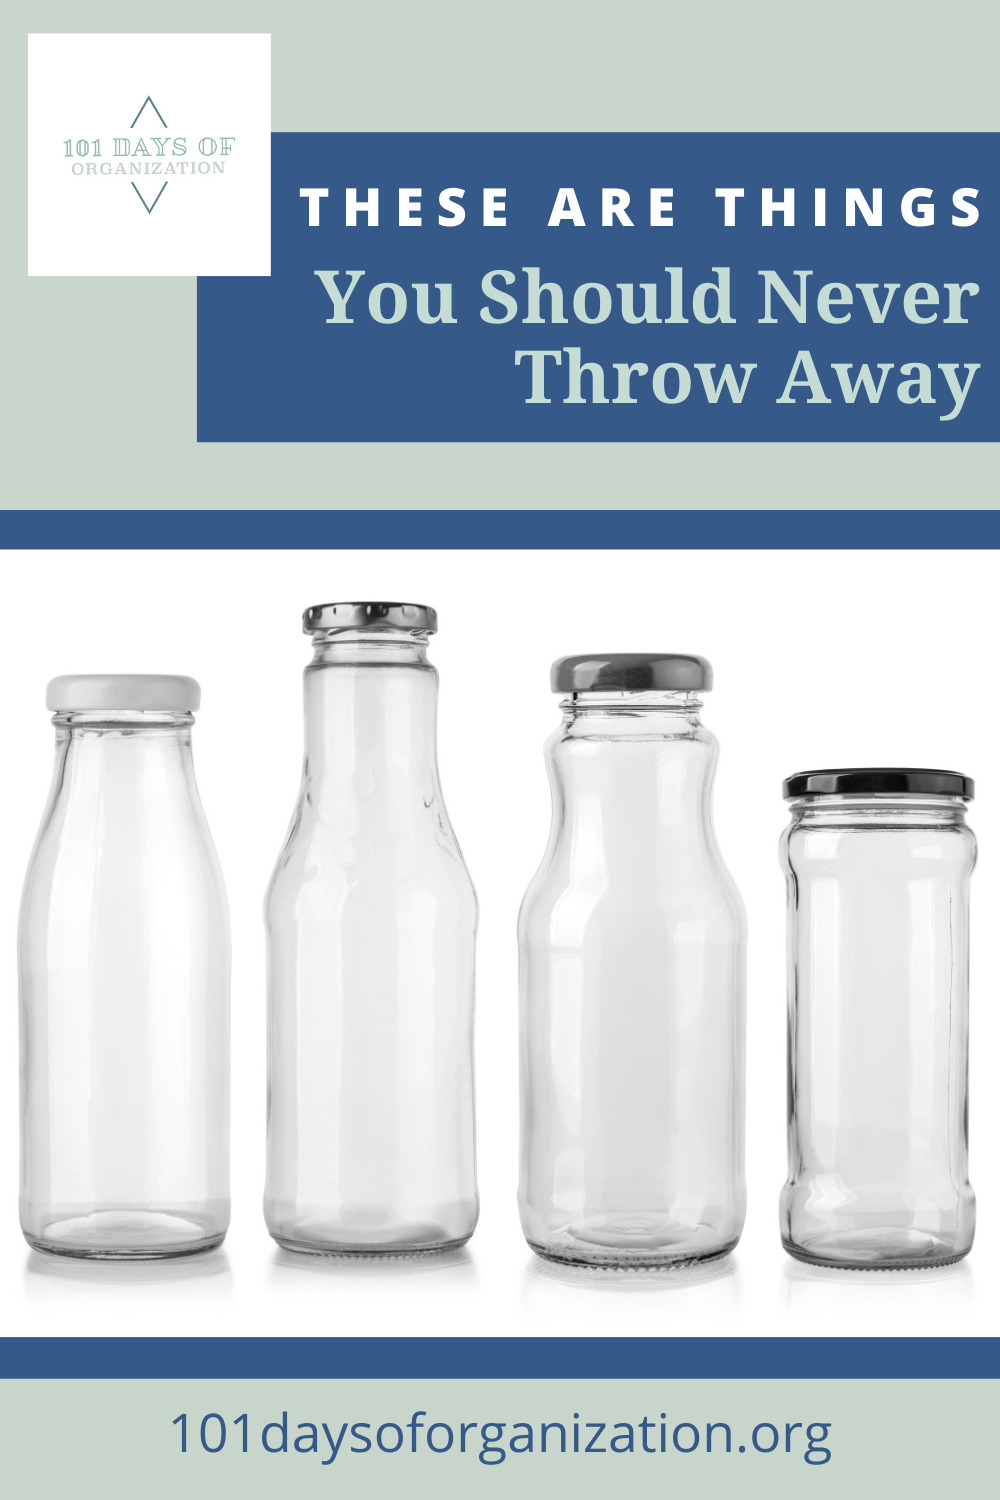 101daysoforganization.org wants to teach you all about the things you should never throw away. Read the article to learn which things you should always keep, and when it is OK to toss other things. This is info for everyone!